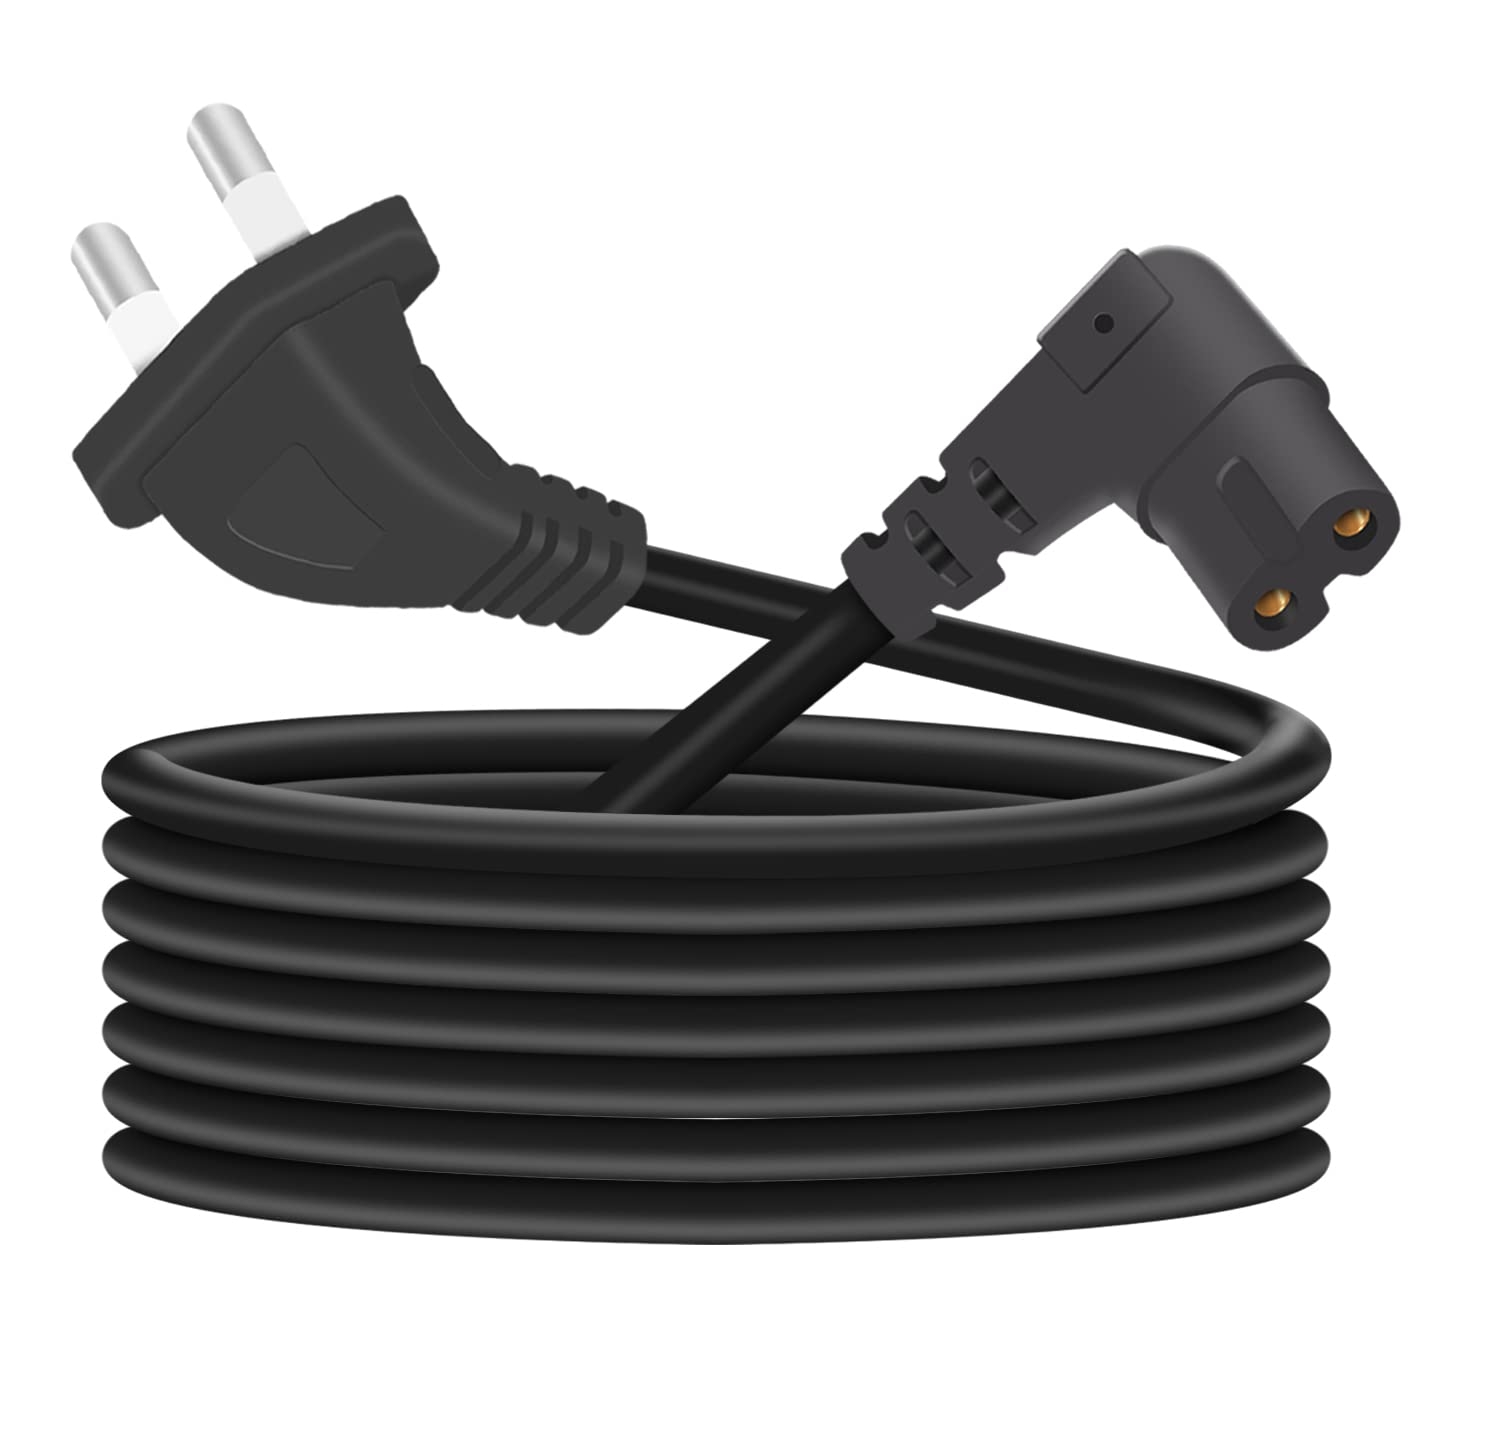 FEDUS 1.2M 2-Pin L-Shape Universal Replacement AC Power Cord for LED TV, Printer, Game Console, Laptop, Notebook, PC